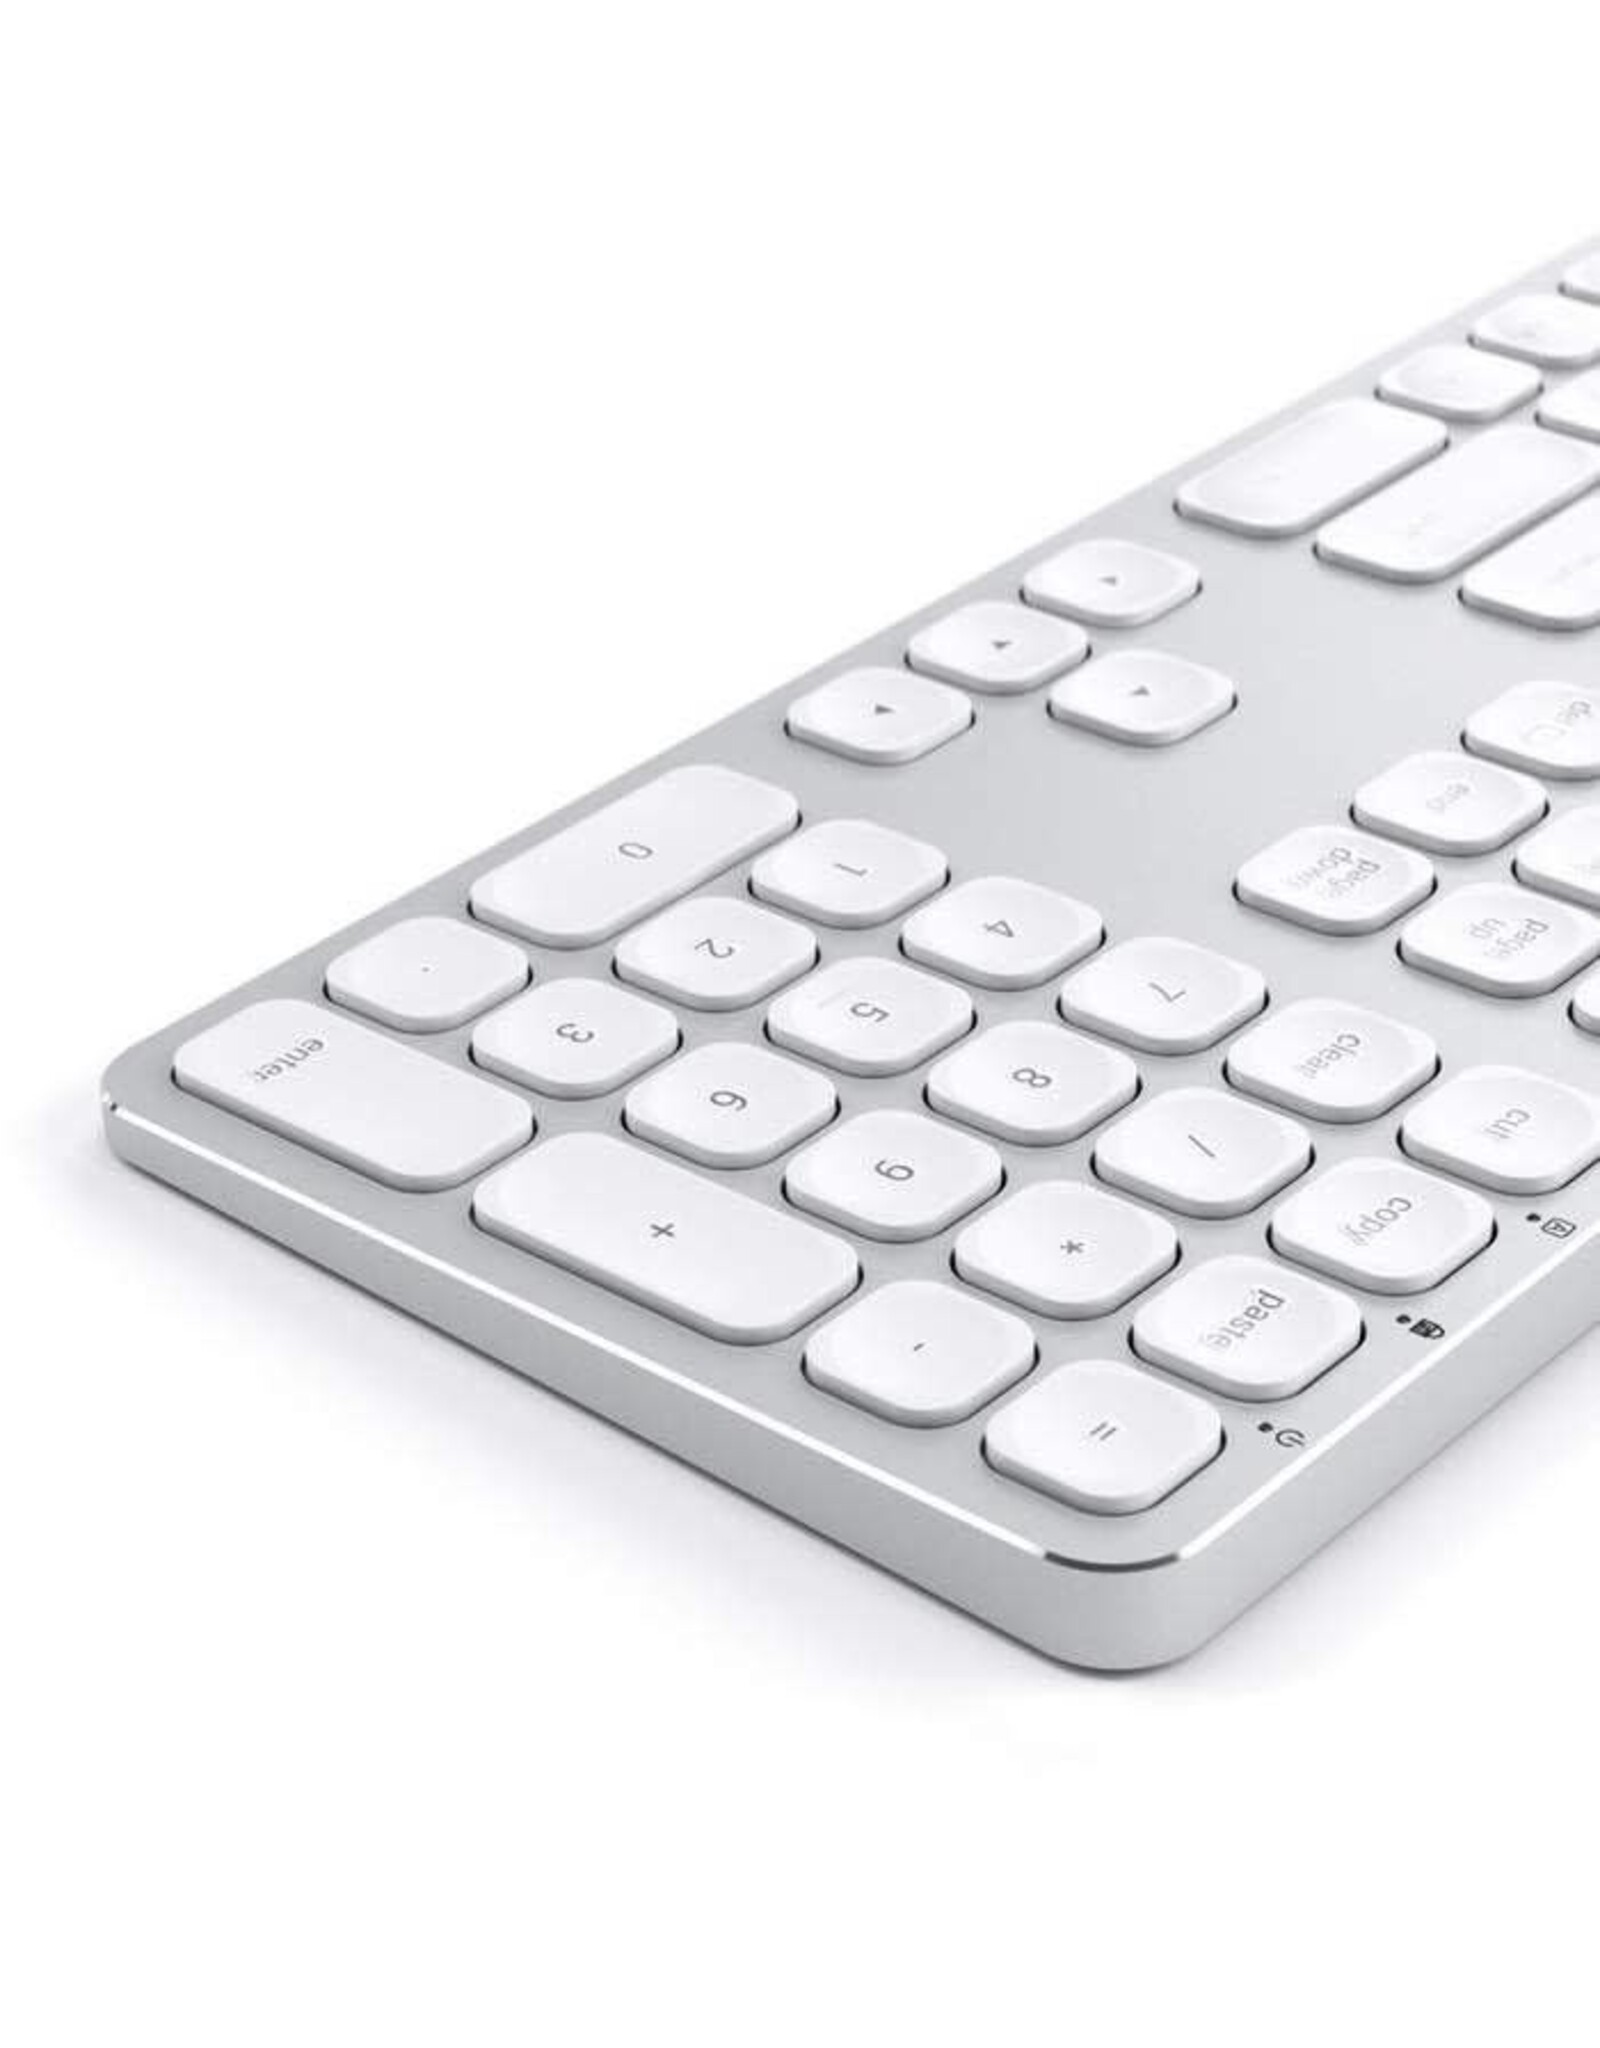 Satechi Satechi Wired Keyboard for Mac Silver